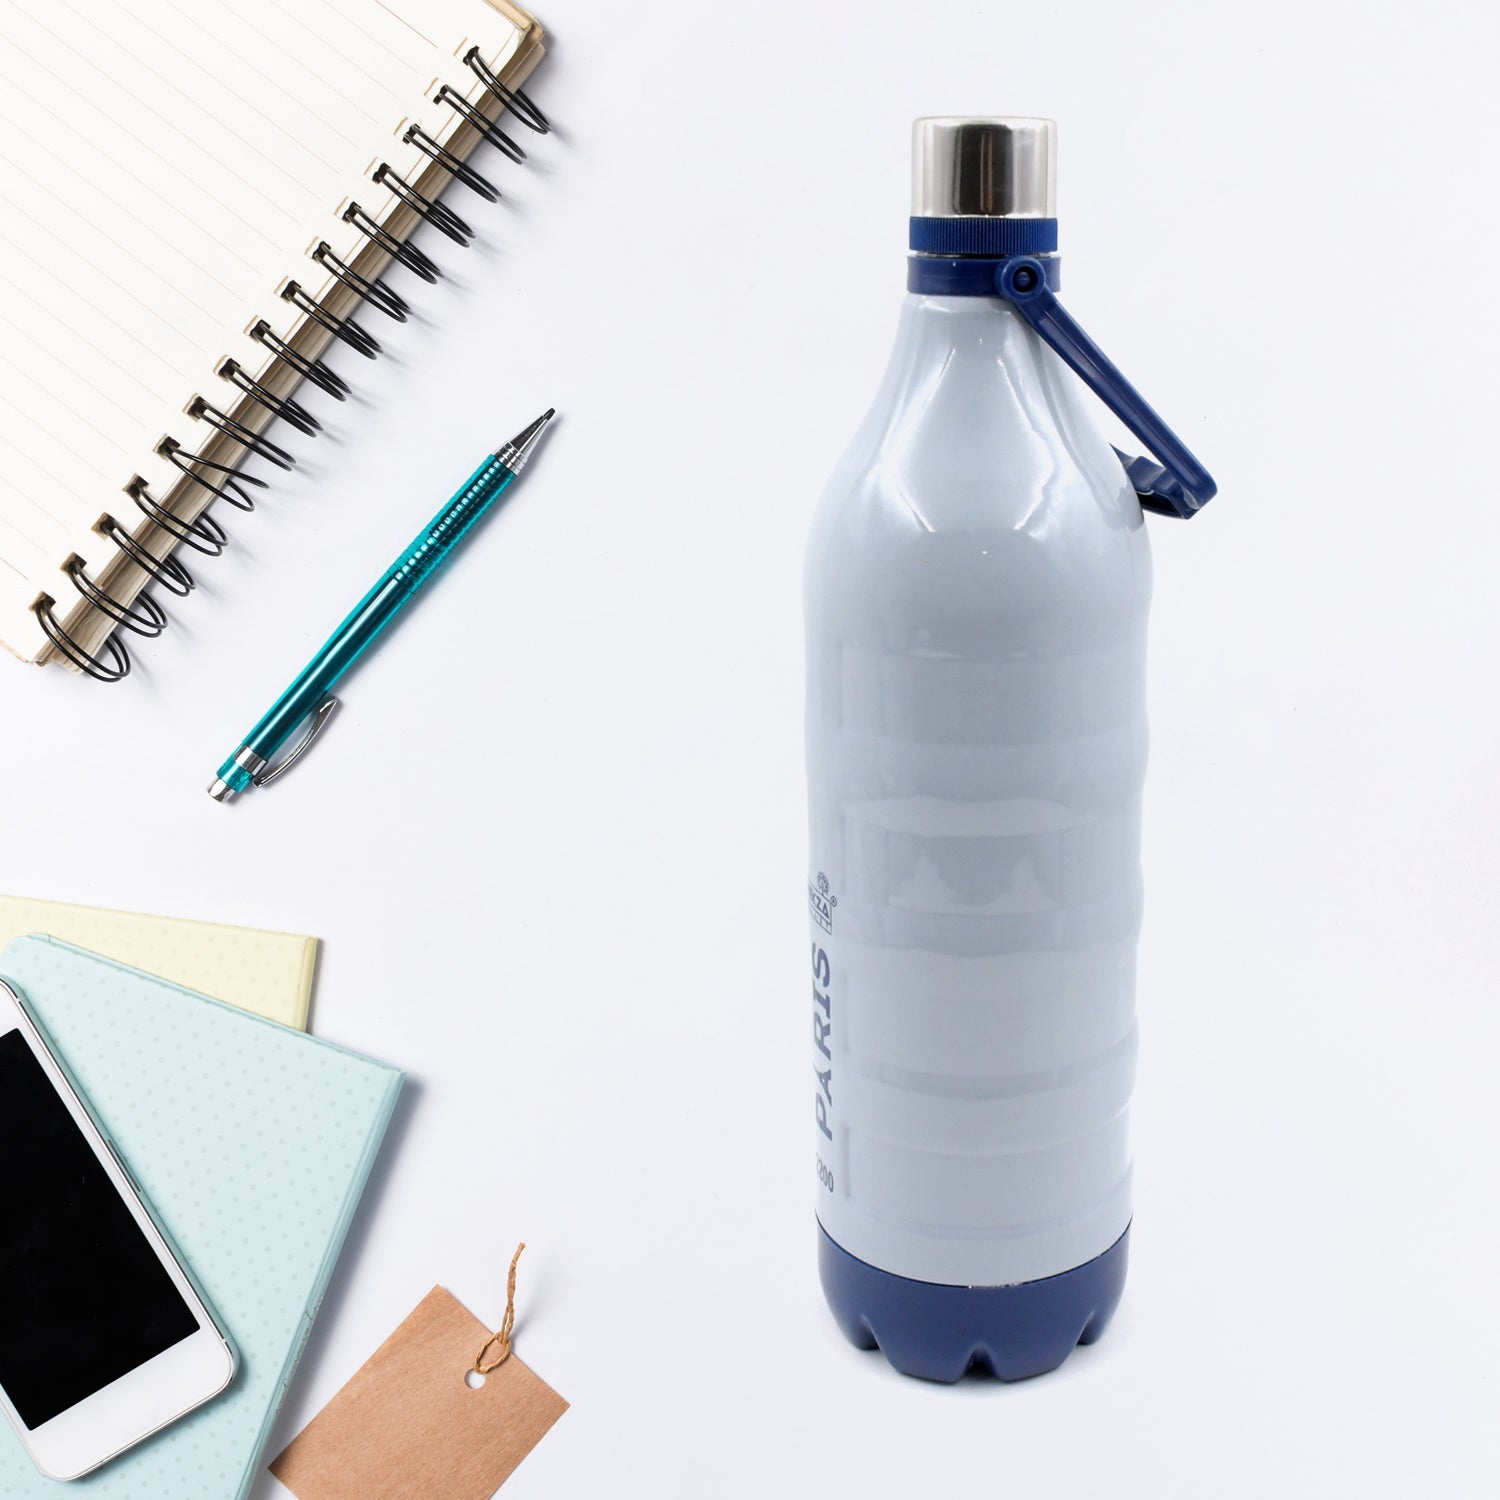 Plastic Sports Insulated Water Bottle with Handle Easy to Carry High Quality Water Bottle, BPA-Free & Leak-Proof! for Kids' School, For Fridge, Office, Sports, School, Gym, Yoga (1 Pc, 1500ML, 2200ML)